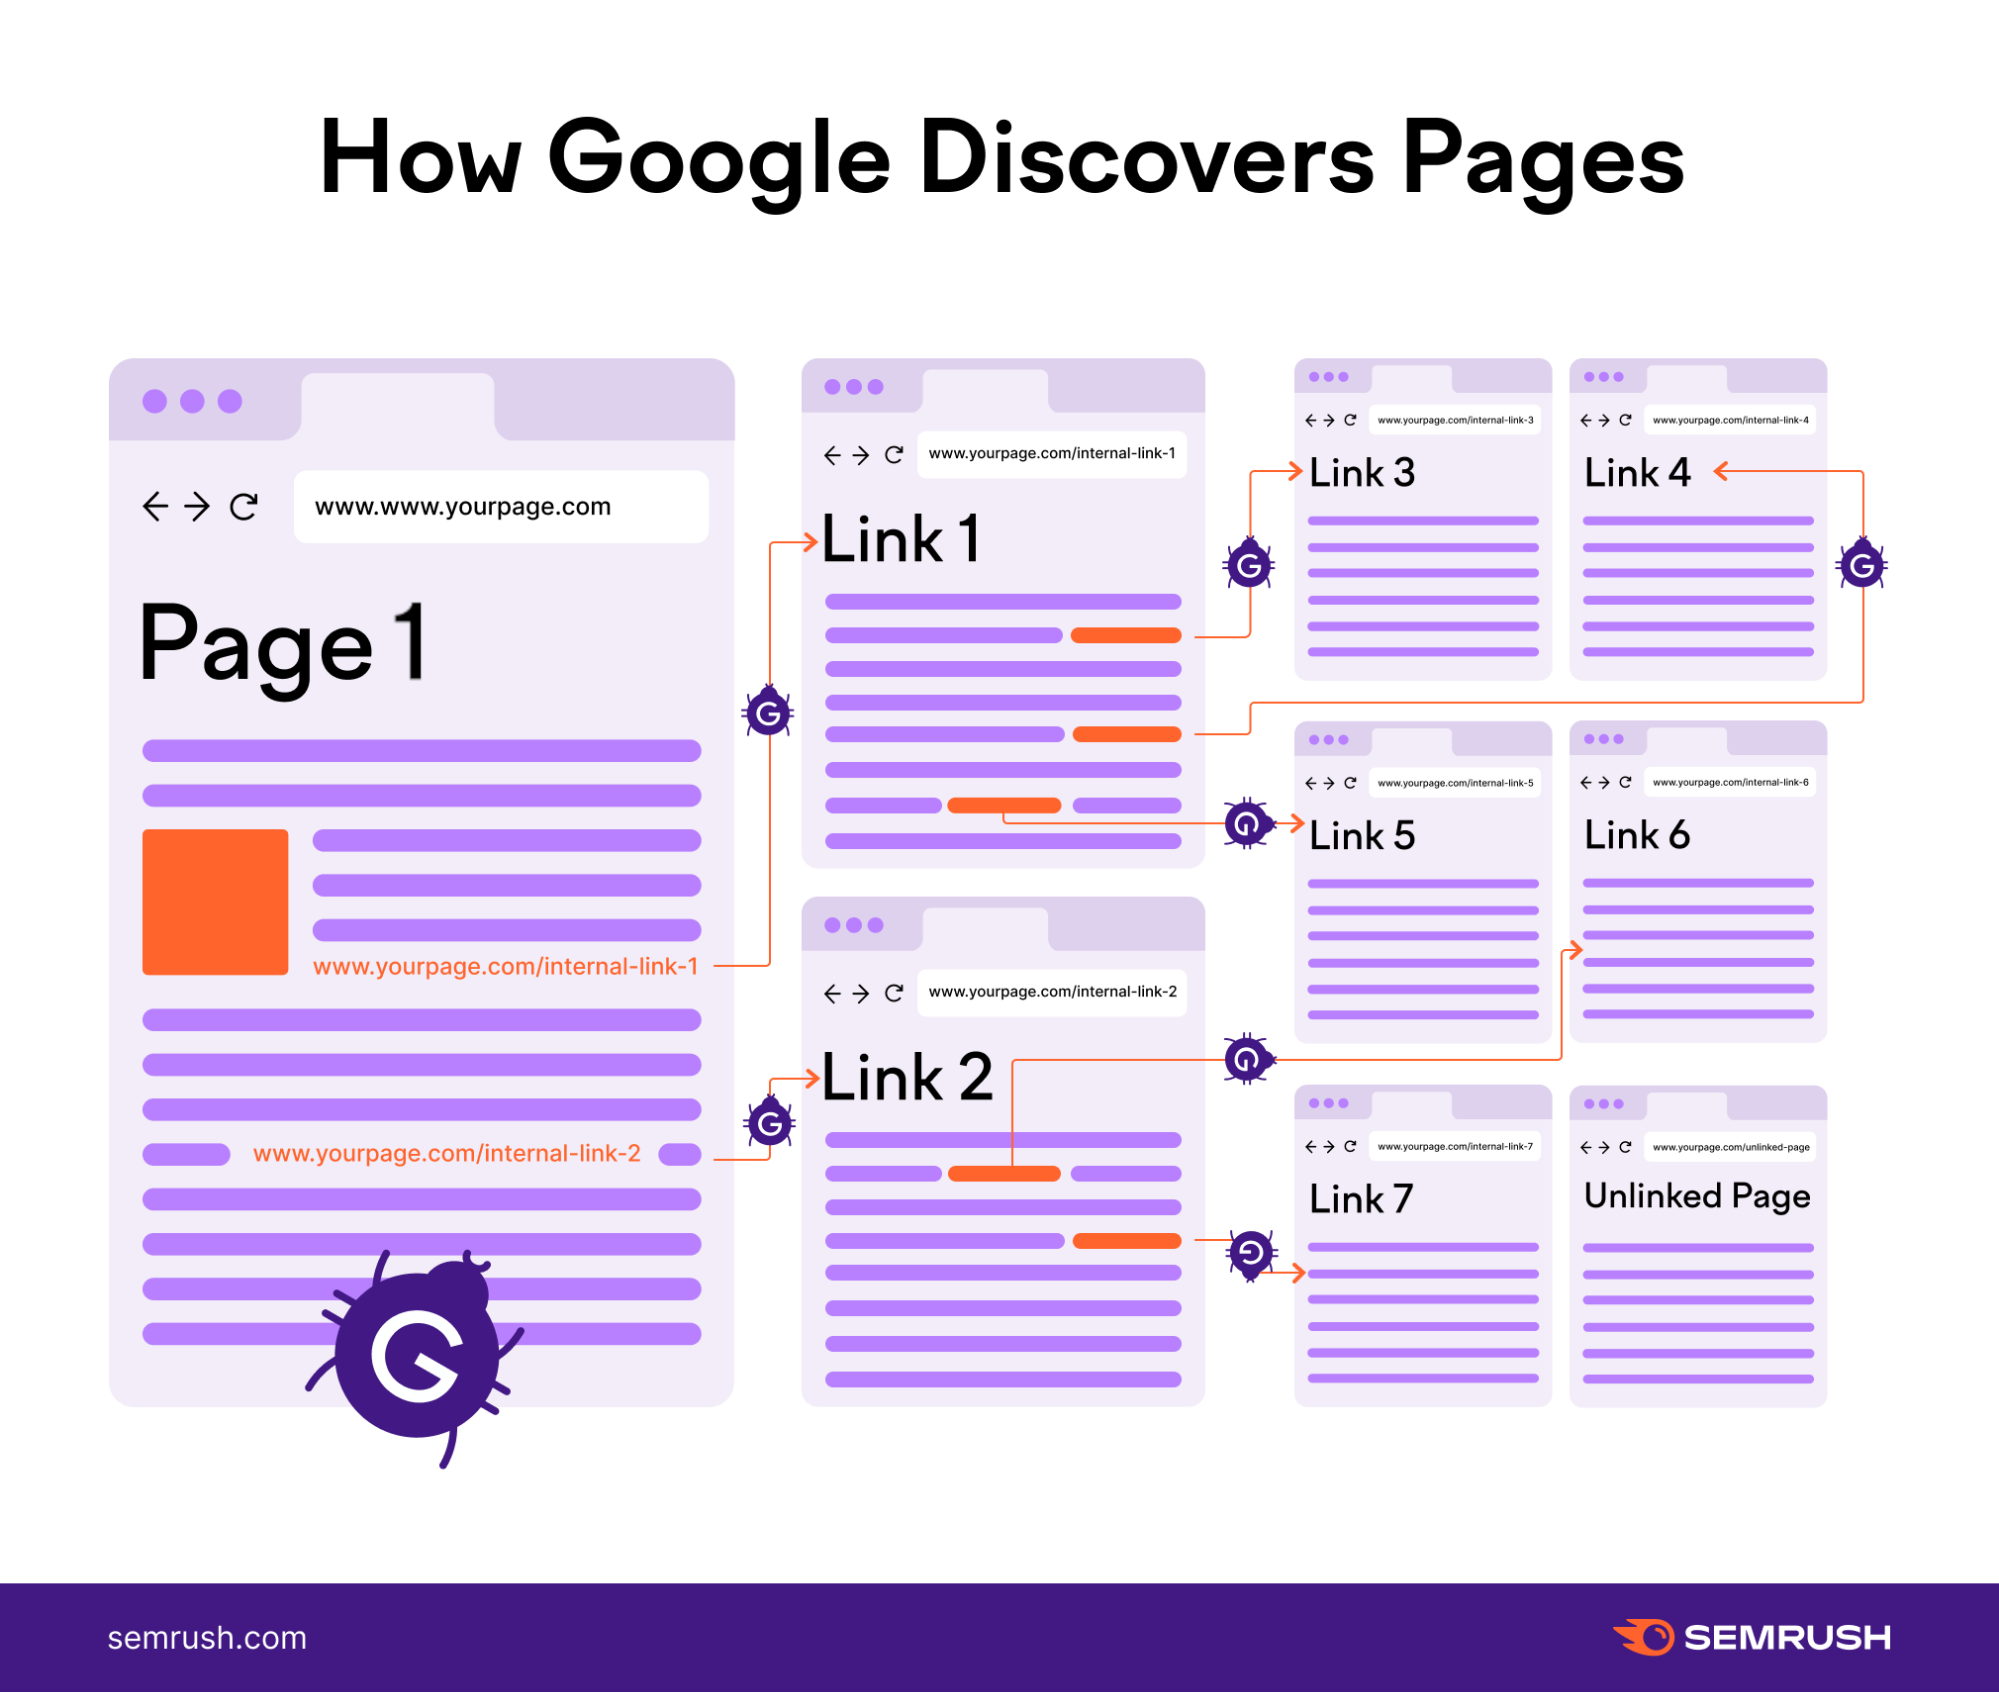 how Google discovers pages